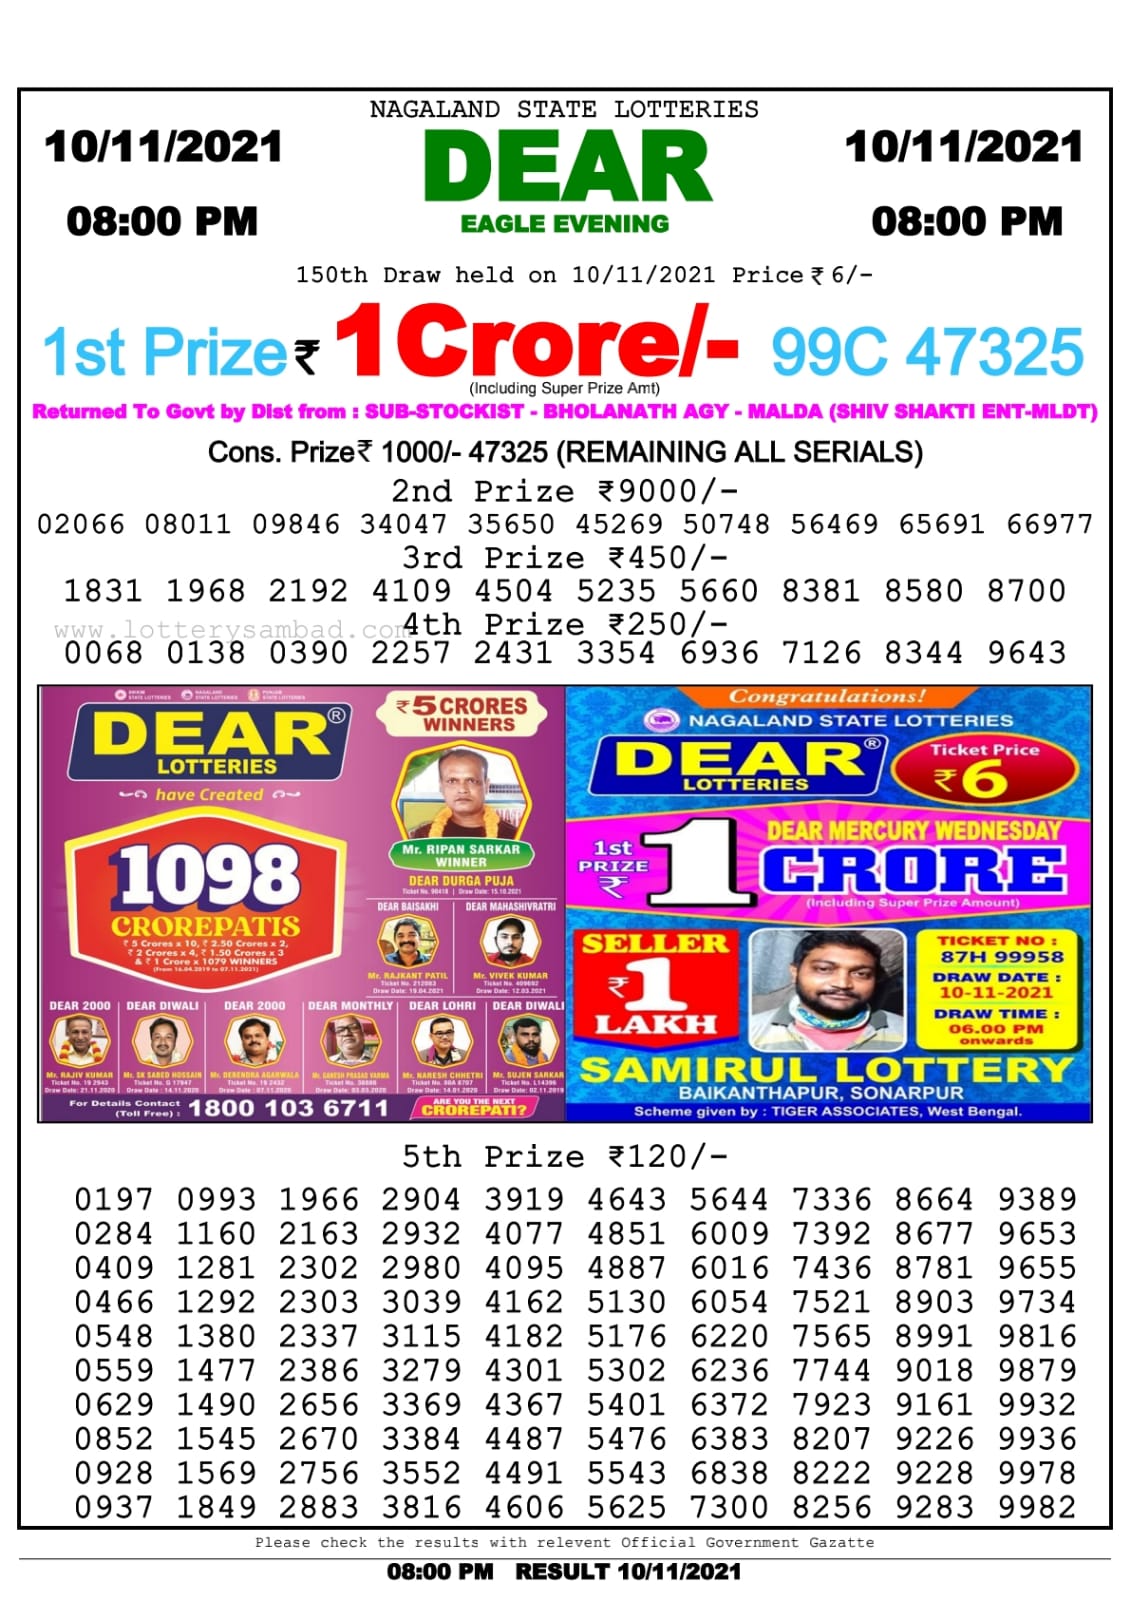 Dear Lottery Nagaland State Lottery Today 8:00 PM 10-11-2021